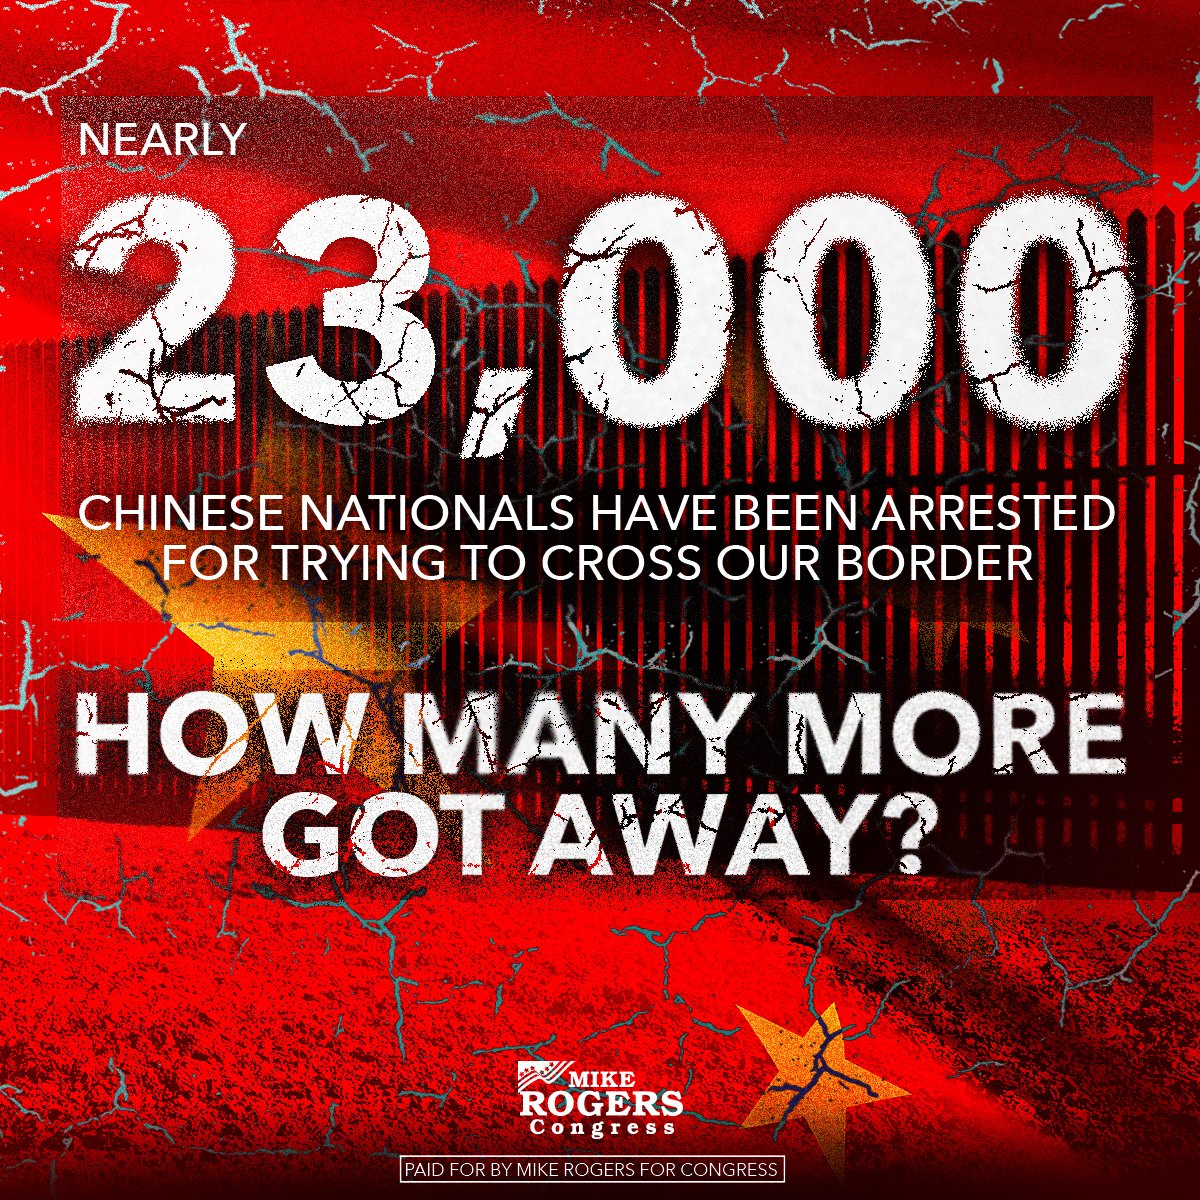 ICYMI: Nearly 23,000 Chinese nationals have been arrested for illegally crossing the border this fiscal year. How many more weren’t apprehended or have been released into our country? Our border security IS national security!